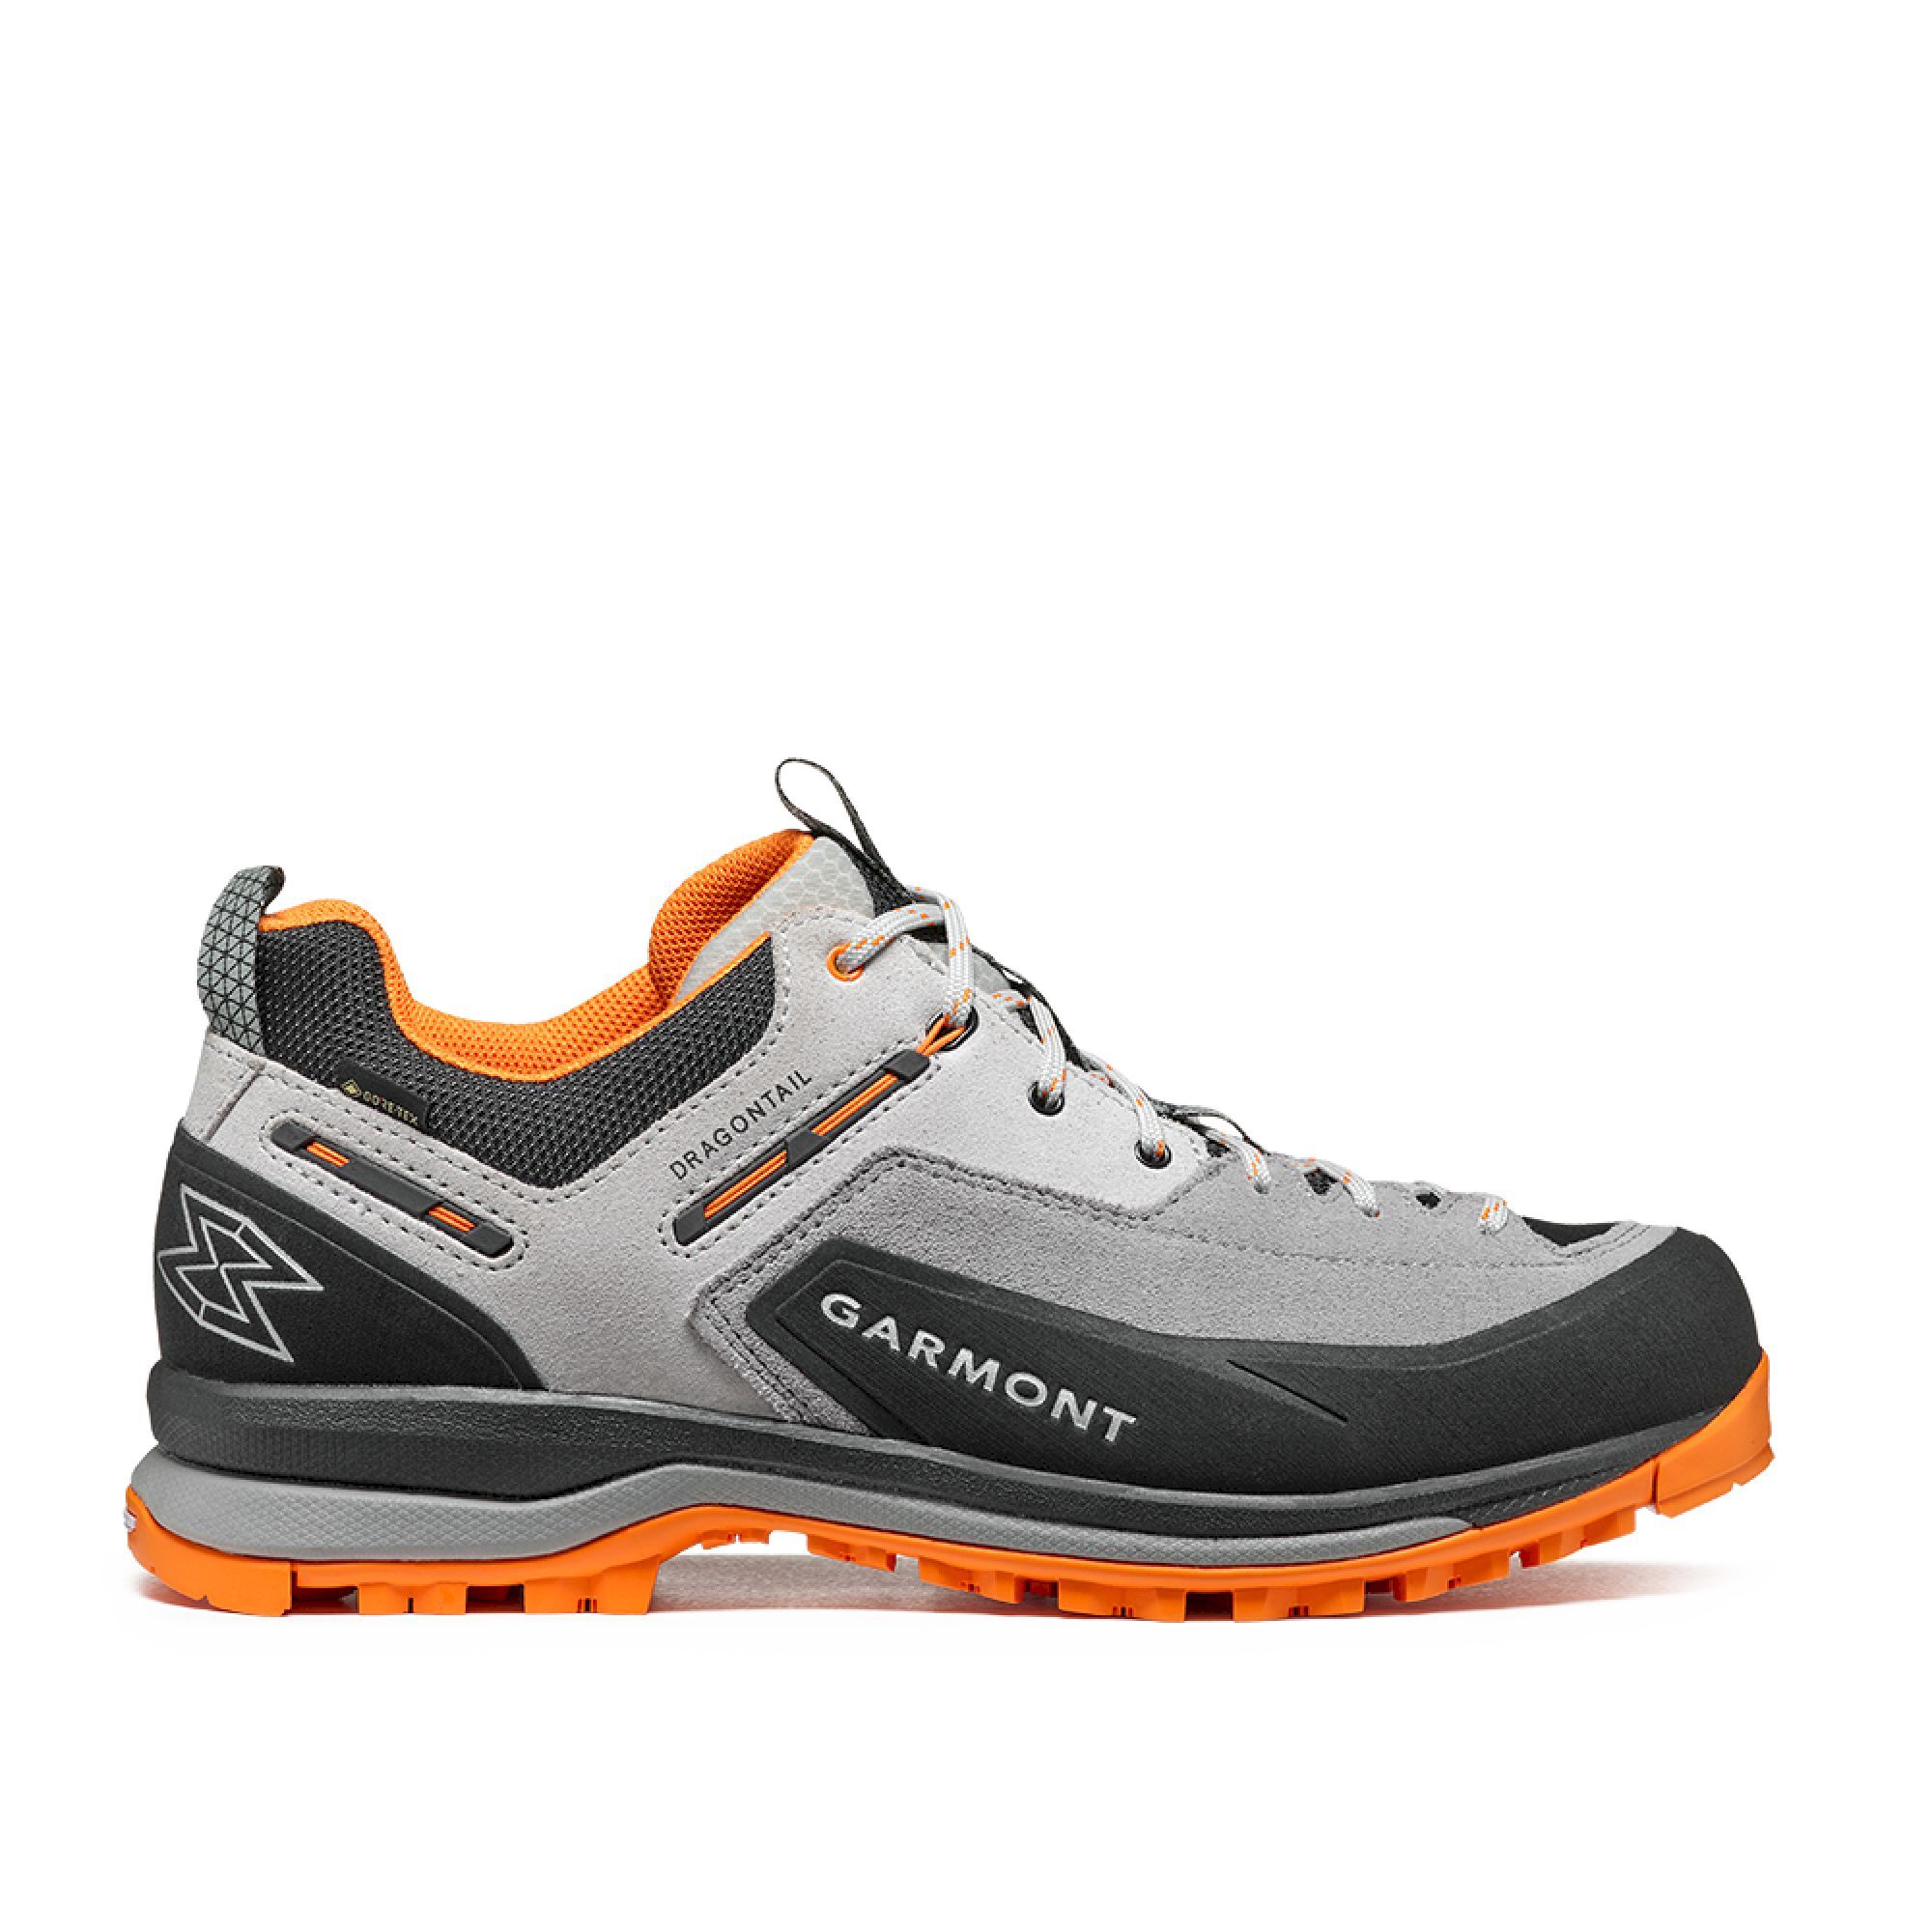 Garmont Dragontail Tech GTX - Limited Edition - Chaussures approche | Hardloop